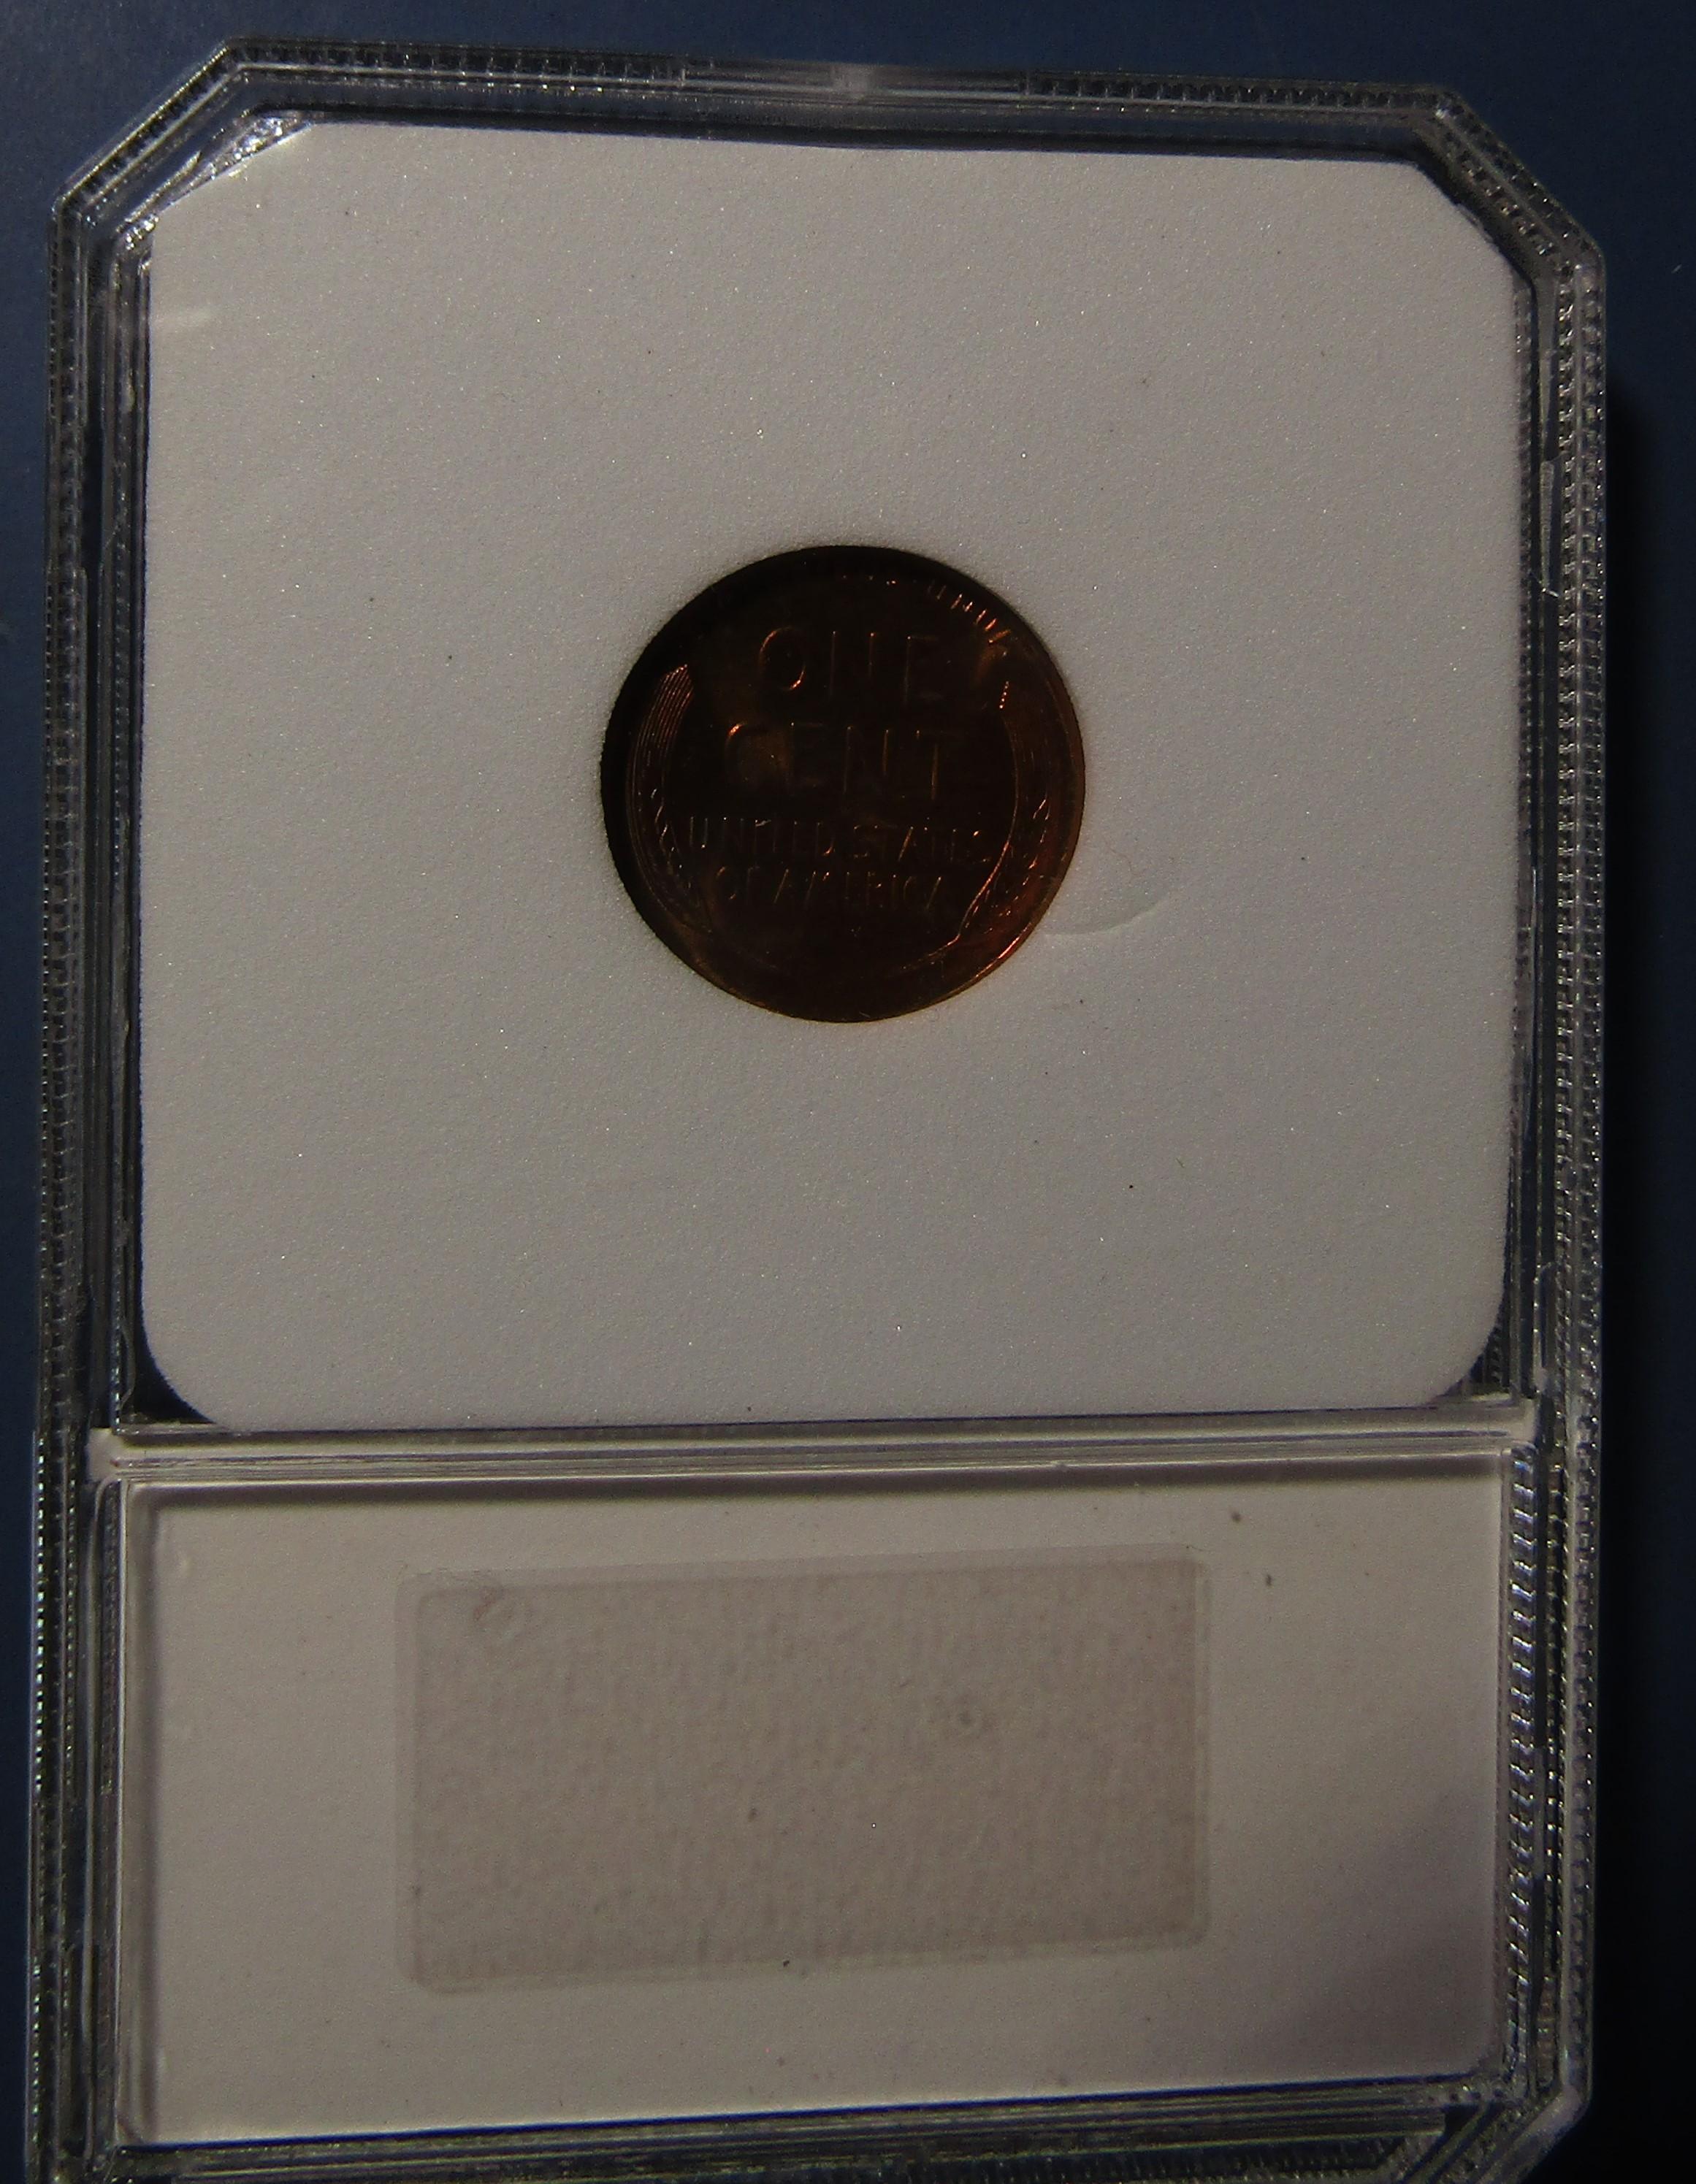 1942 LINCOLN CENT RAINBOW PCI MS-67+ RED BROWN